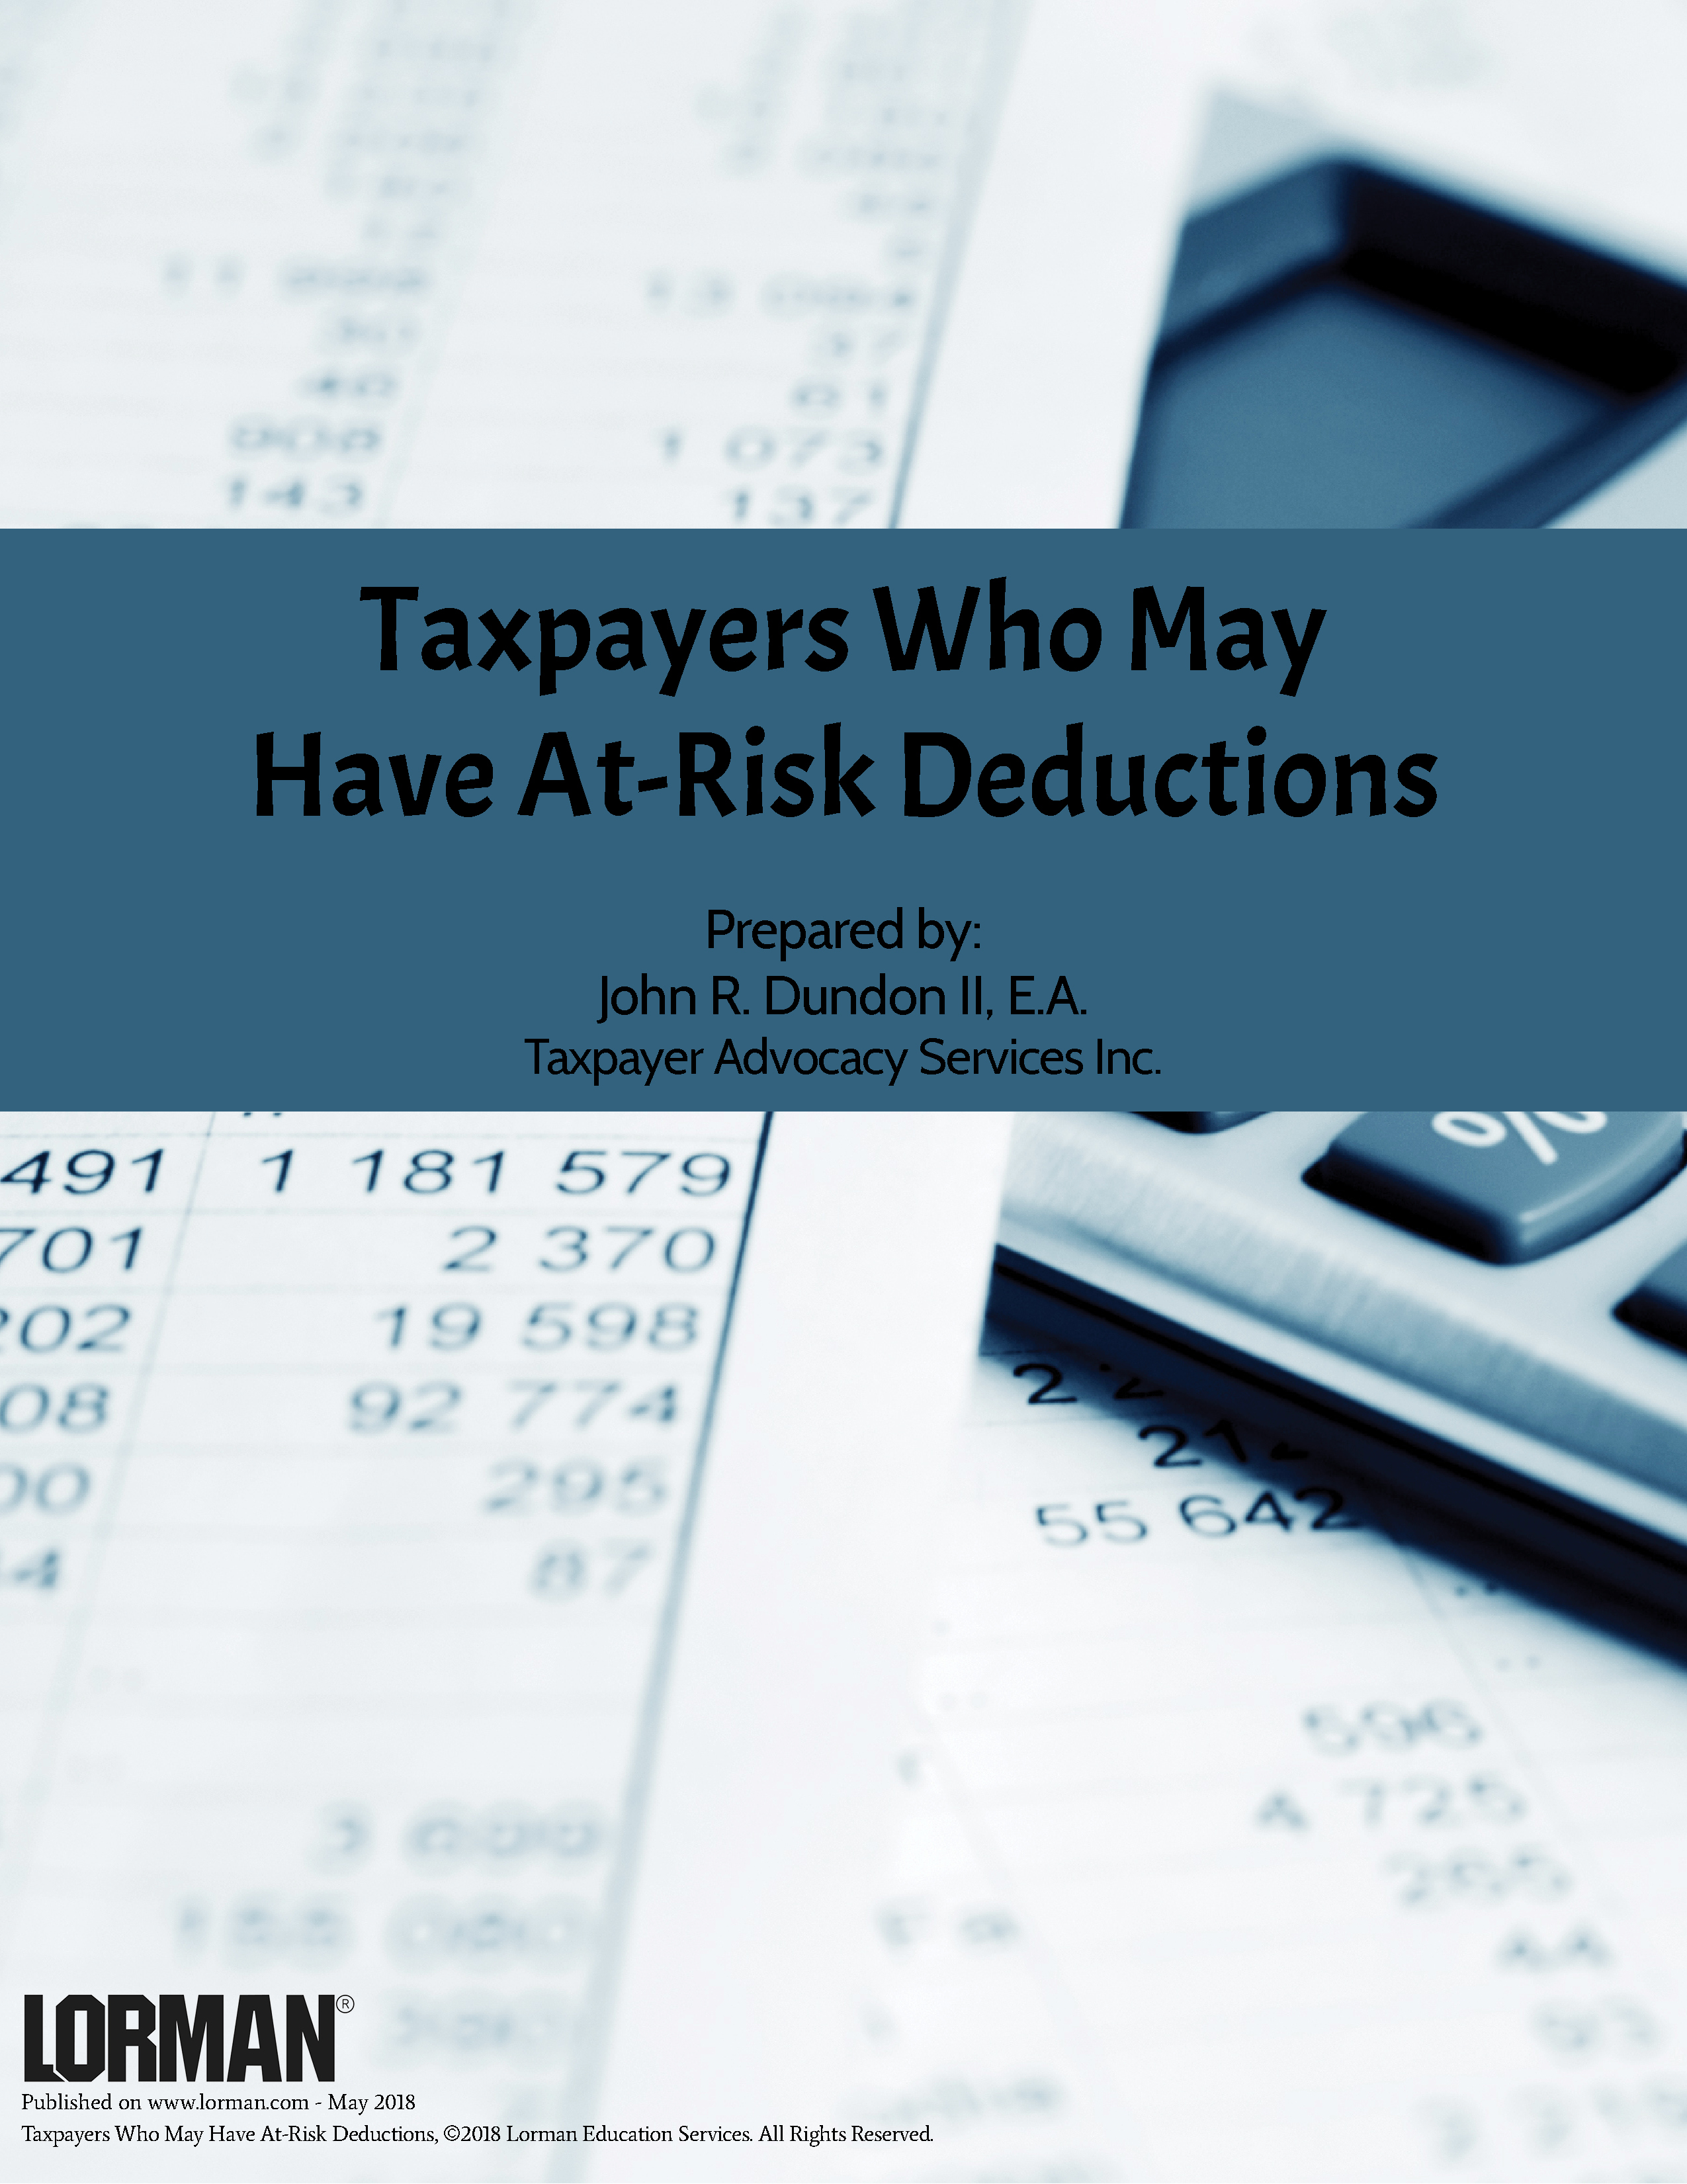 Taxpayers Who May Have At-Risk Deductions